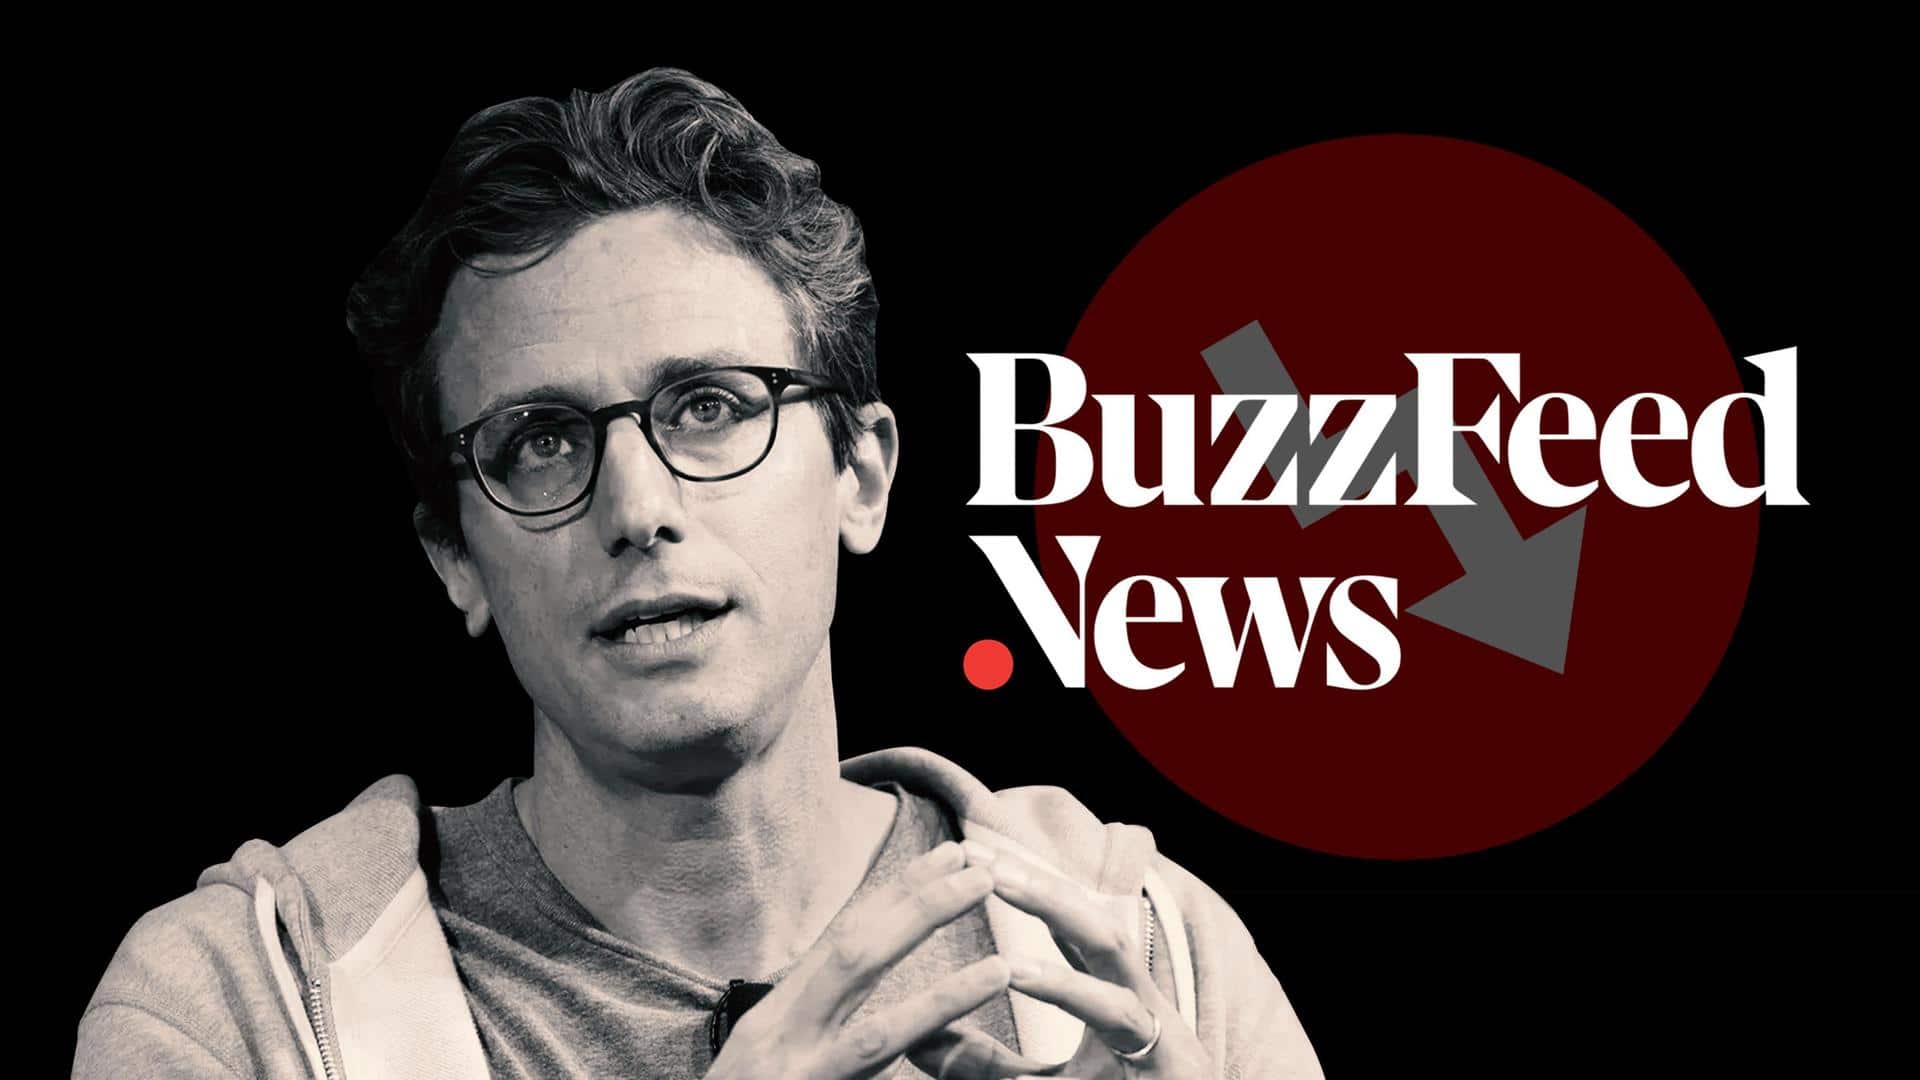 BuzzFeed News shuttered: Here are 5 reasons why it failed